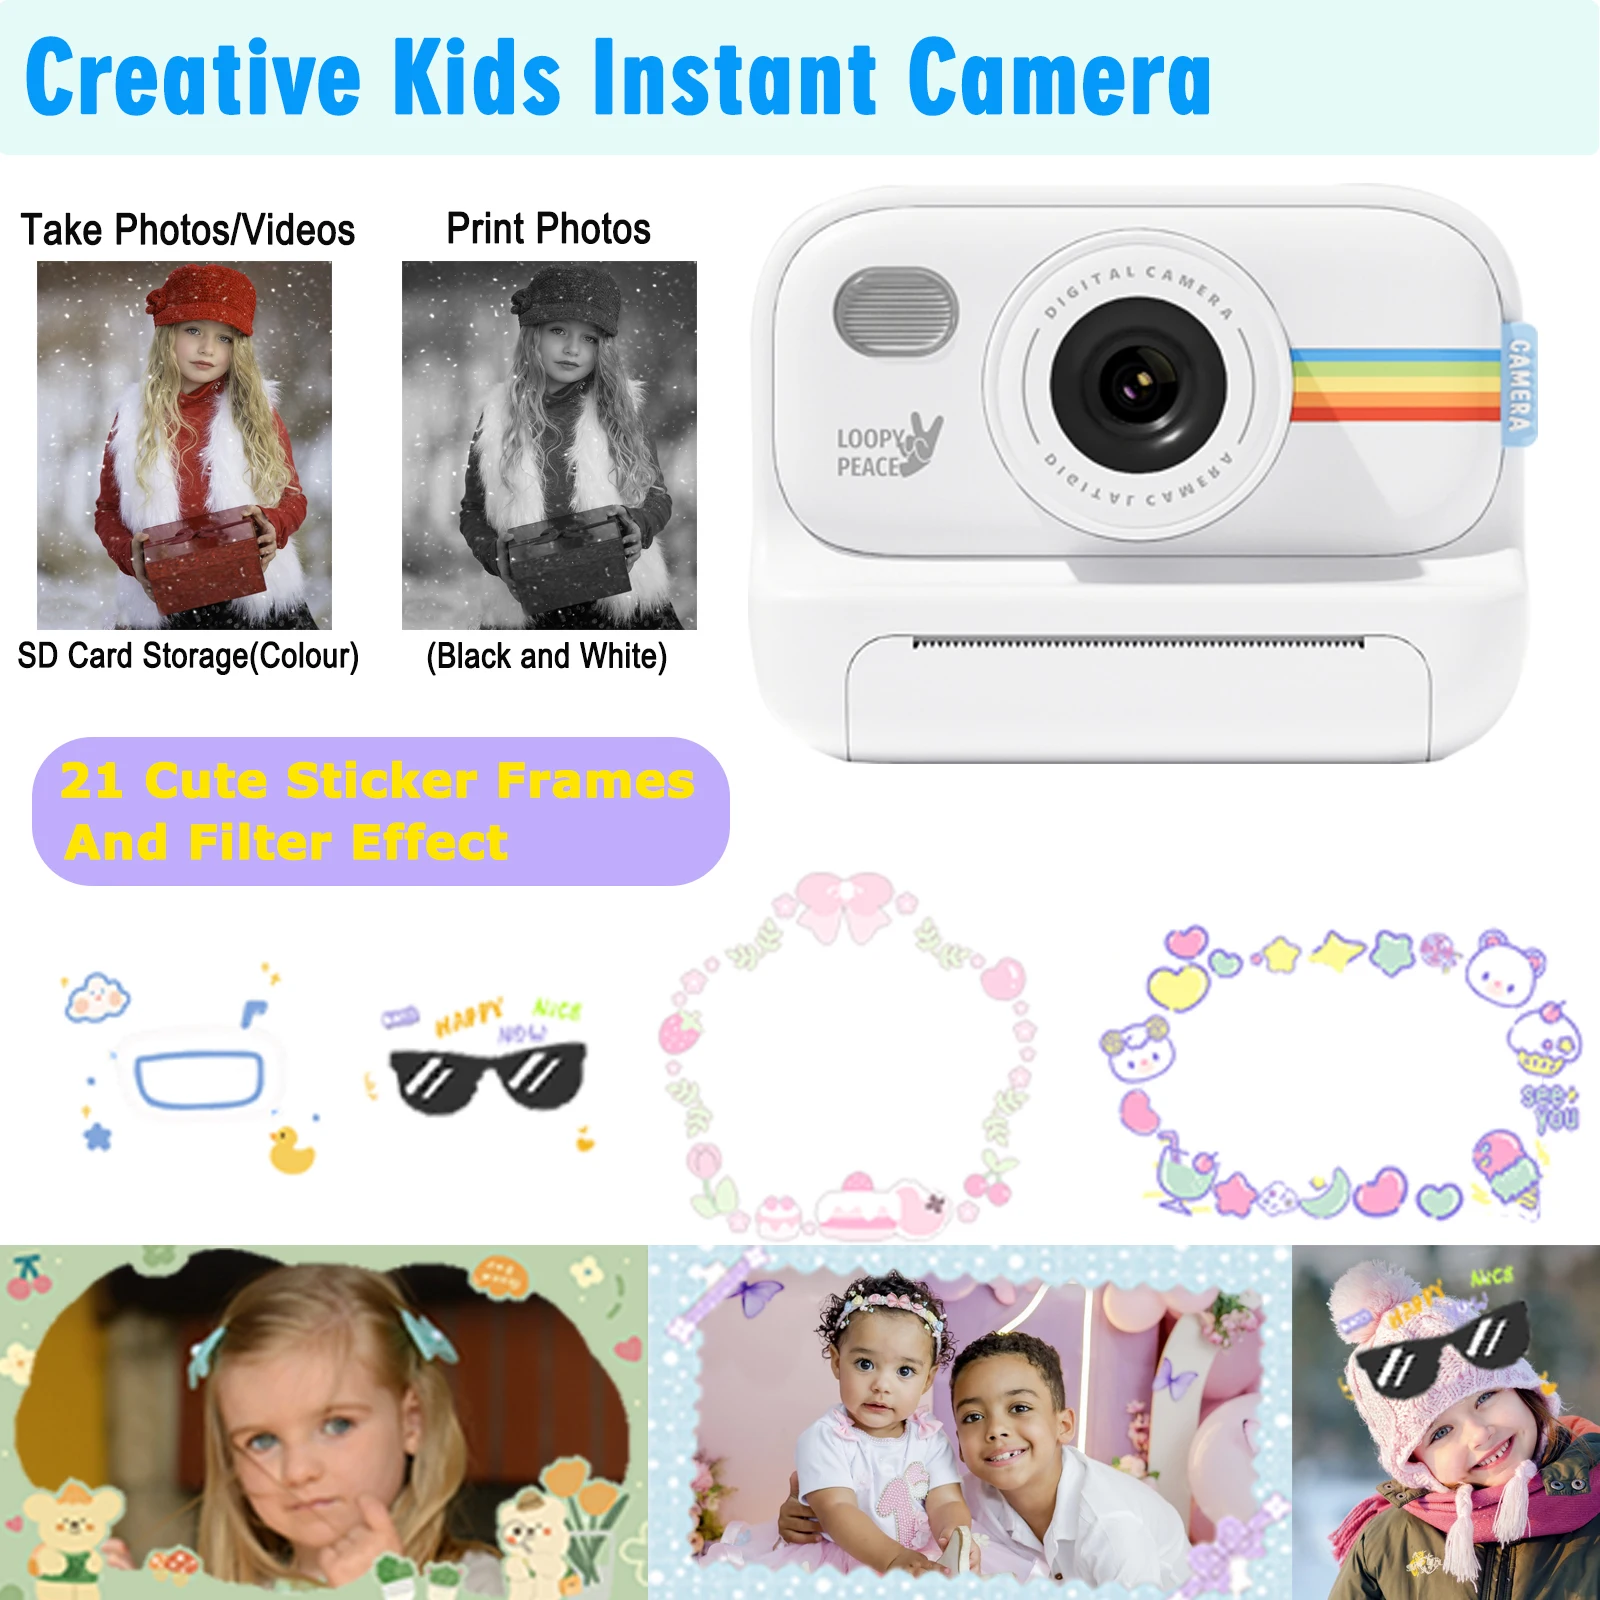 Instant Print Camera for Kids,2.0 Inch Screen Kids Instant Cameras, Christmas Birthday Gifts for Girls Age 3-12,Toddler Toy